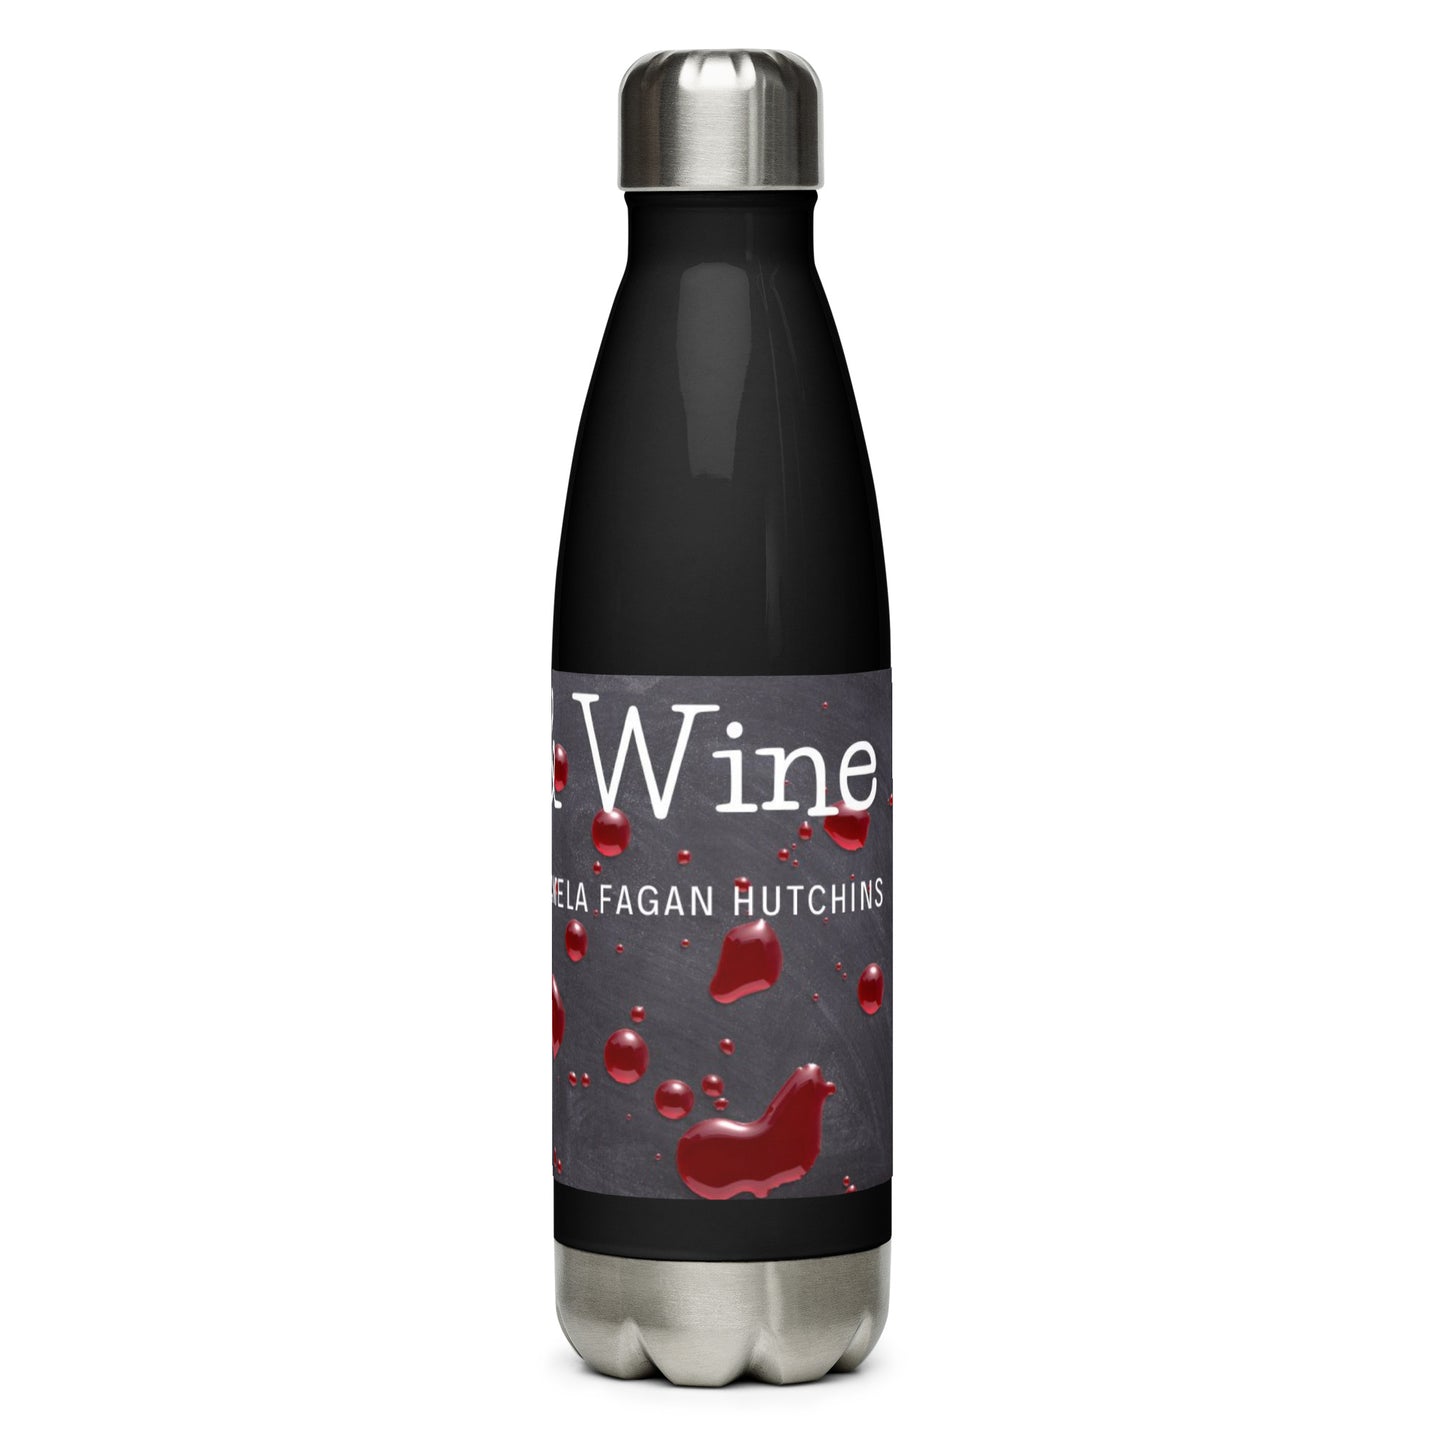 Crime & Wine Stainless steel water bottle